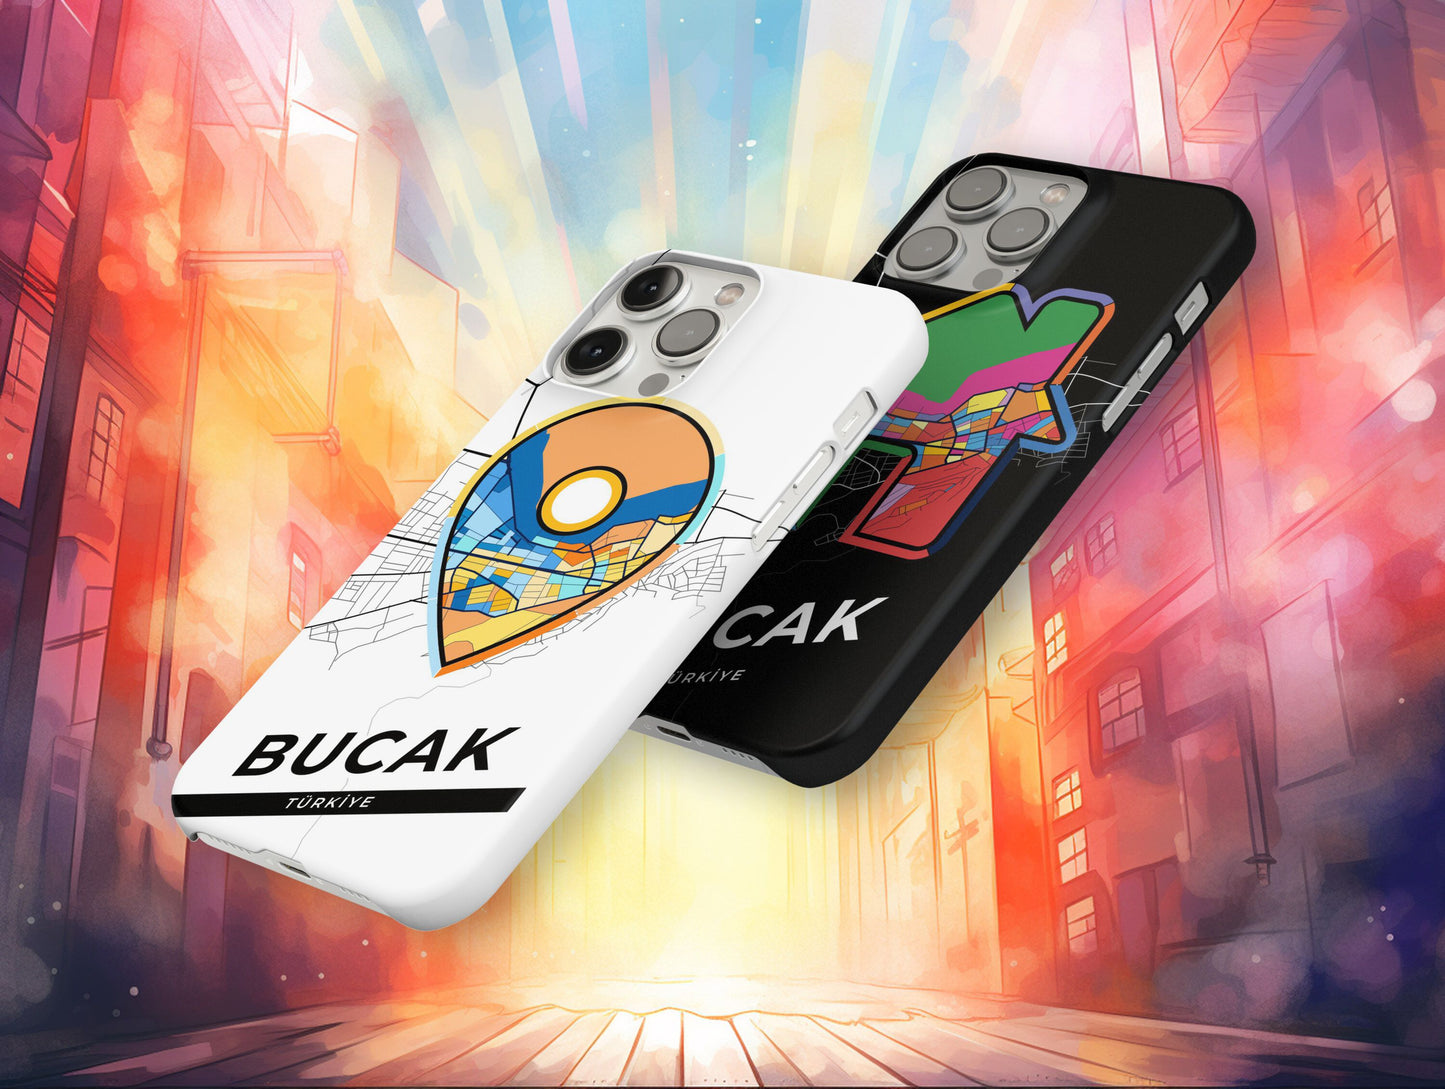 Bucak Turkey slim phone case with colorful icon. Birthday, wedding or housewarming gift. Couple match cases.